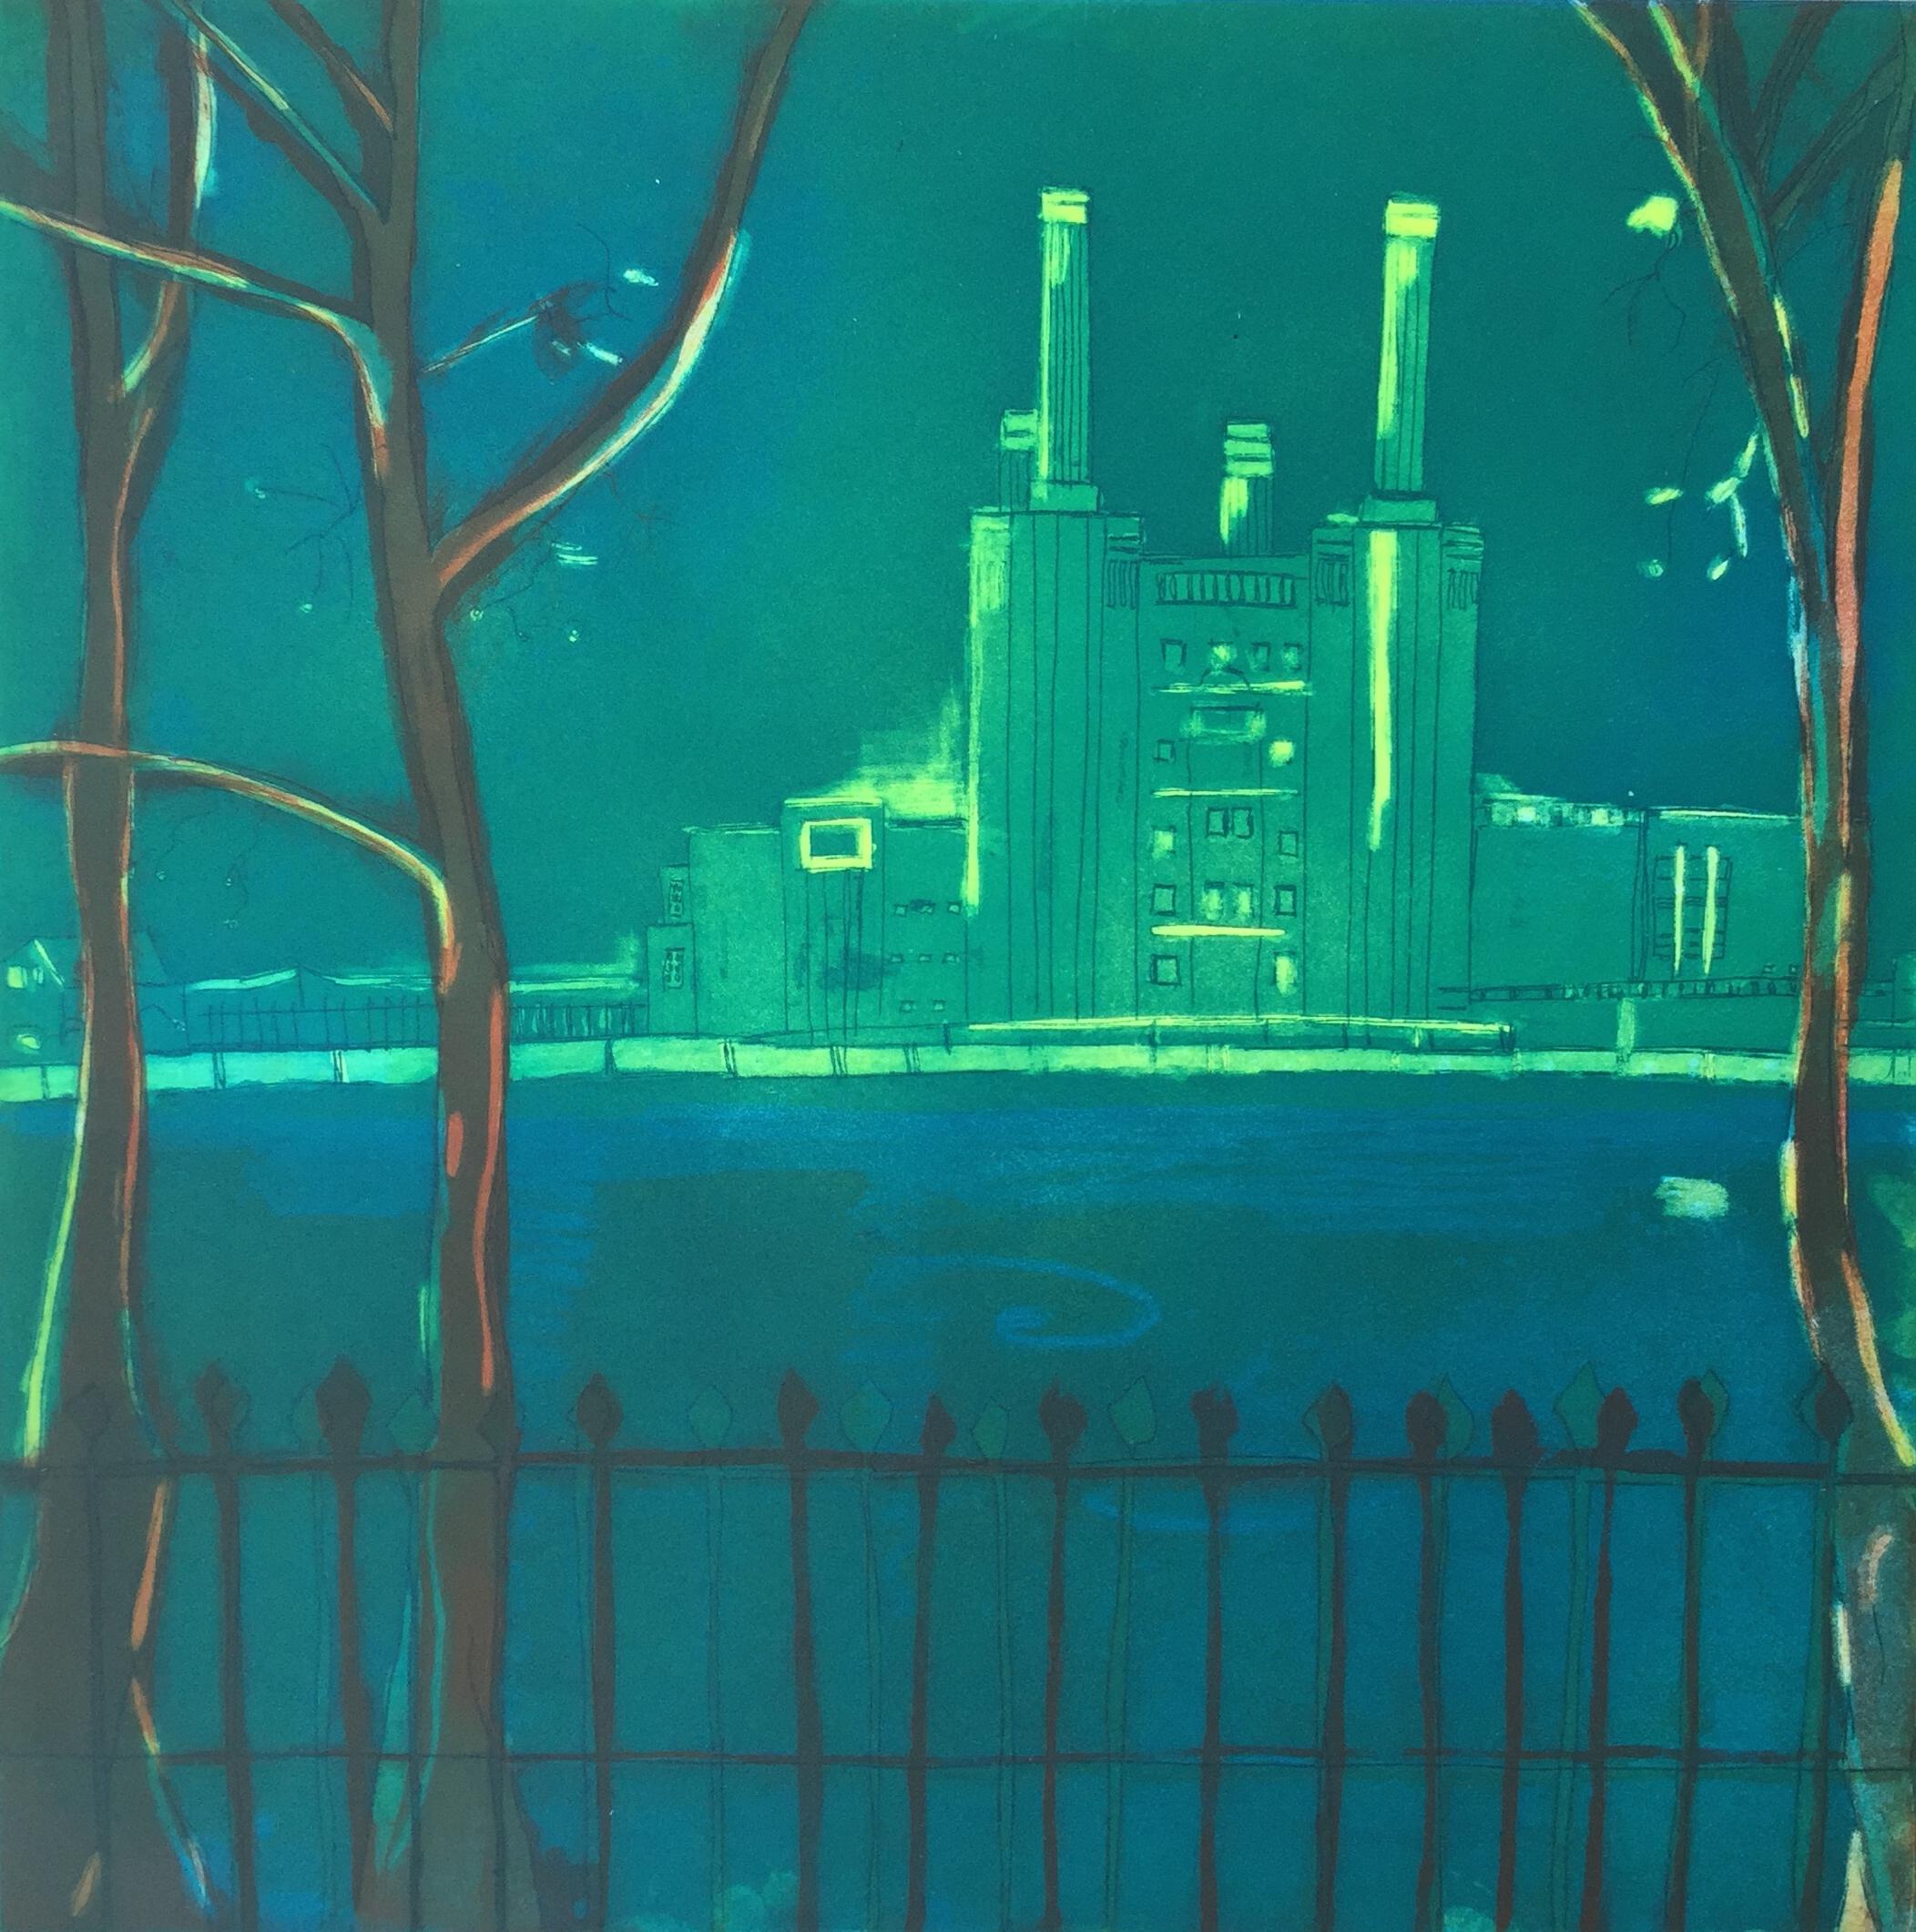 The River by Moonlight - vibrant color, fluid line etching Battersea station 